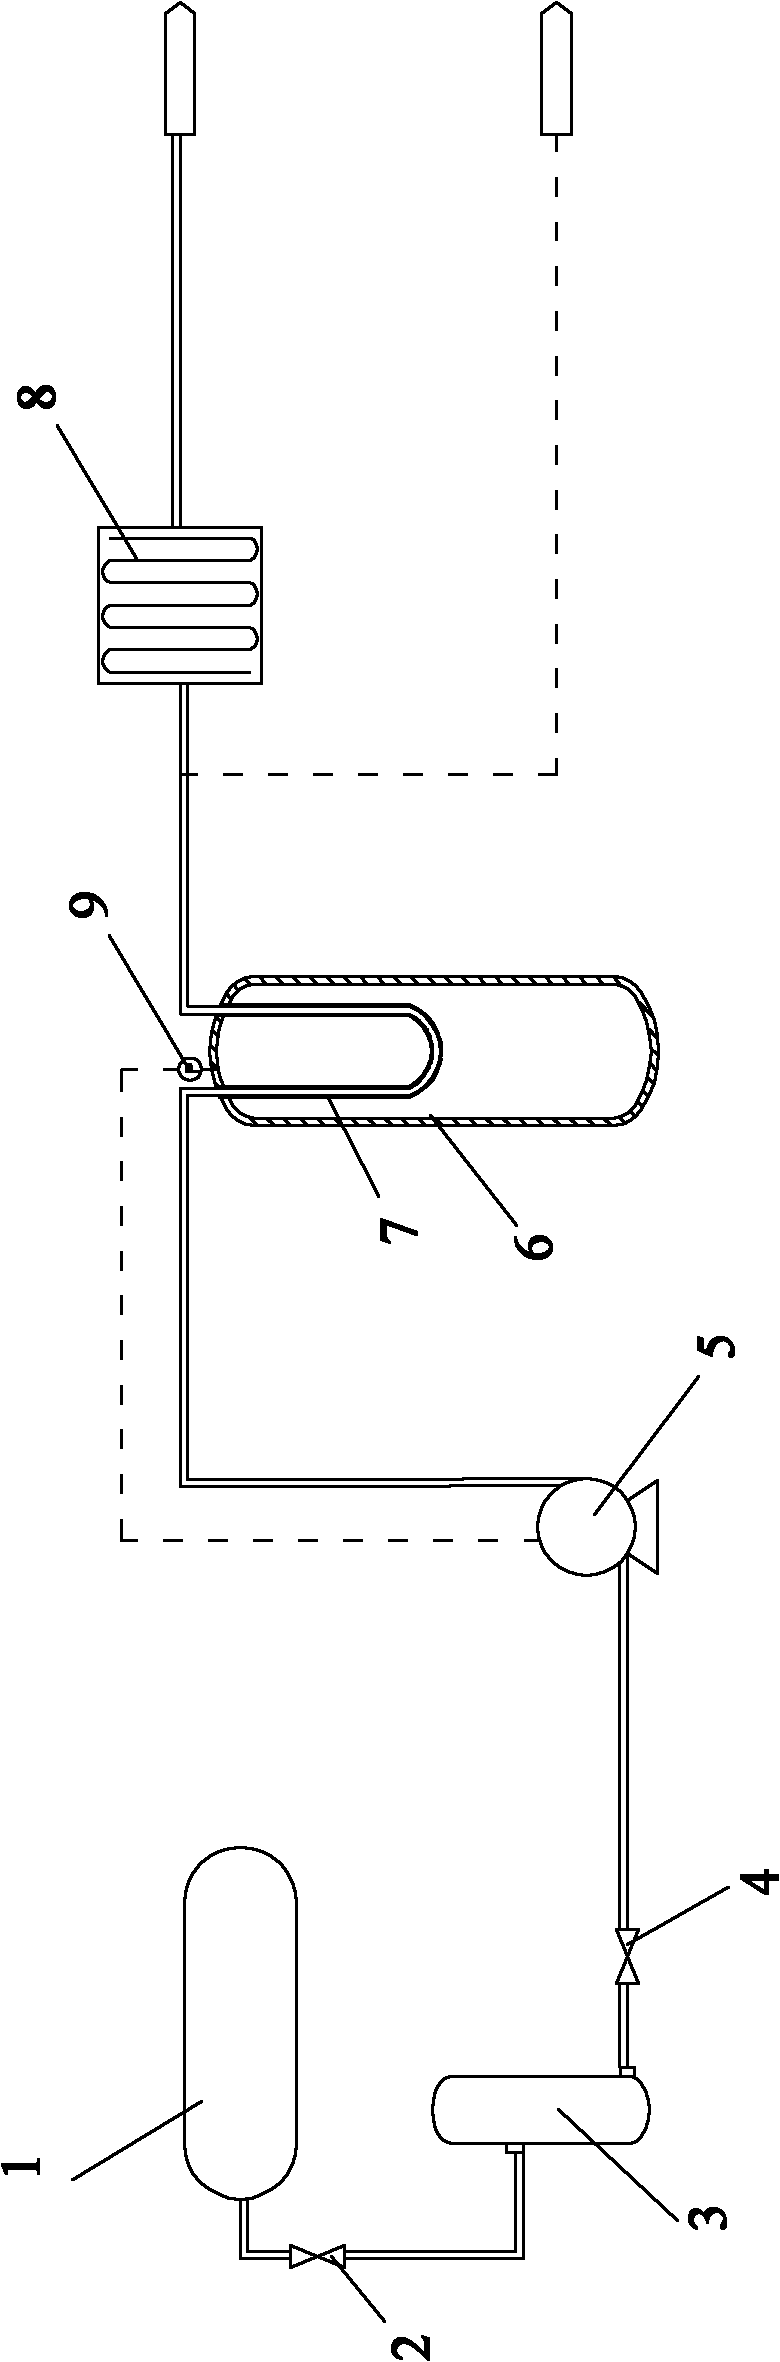 System and method for temperature reduction and pressure stabilization of liquefied natural gas storage tank